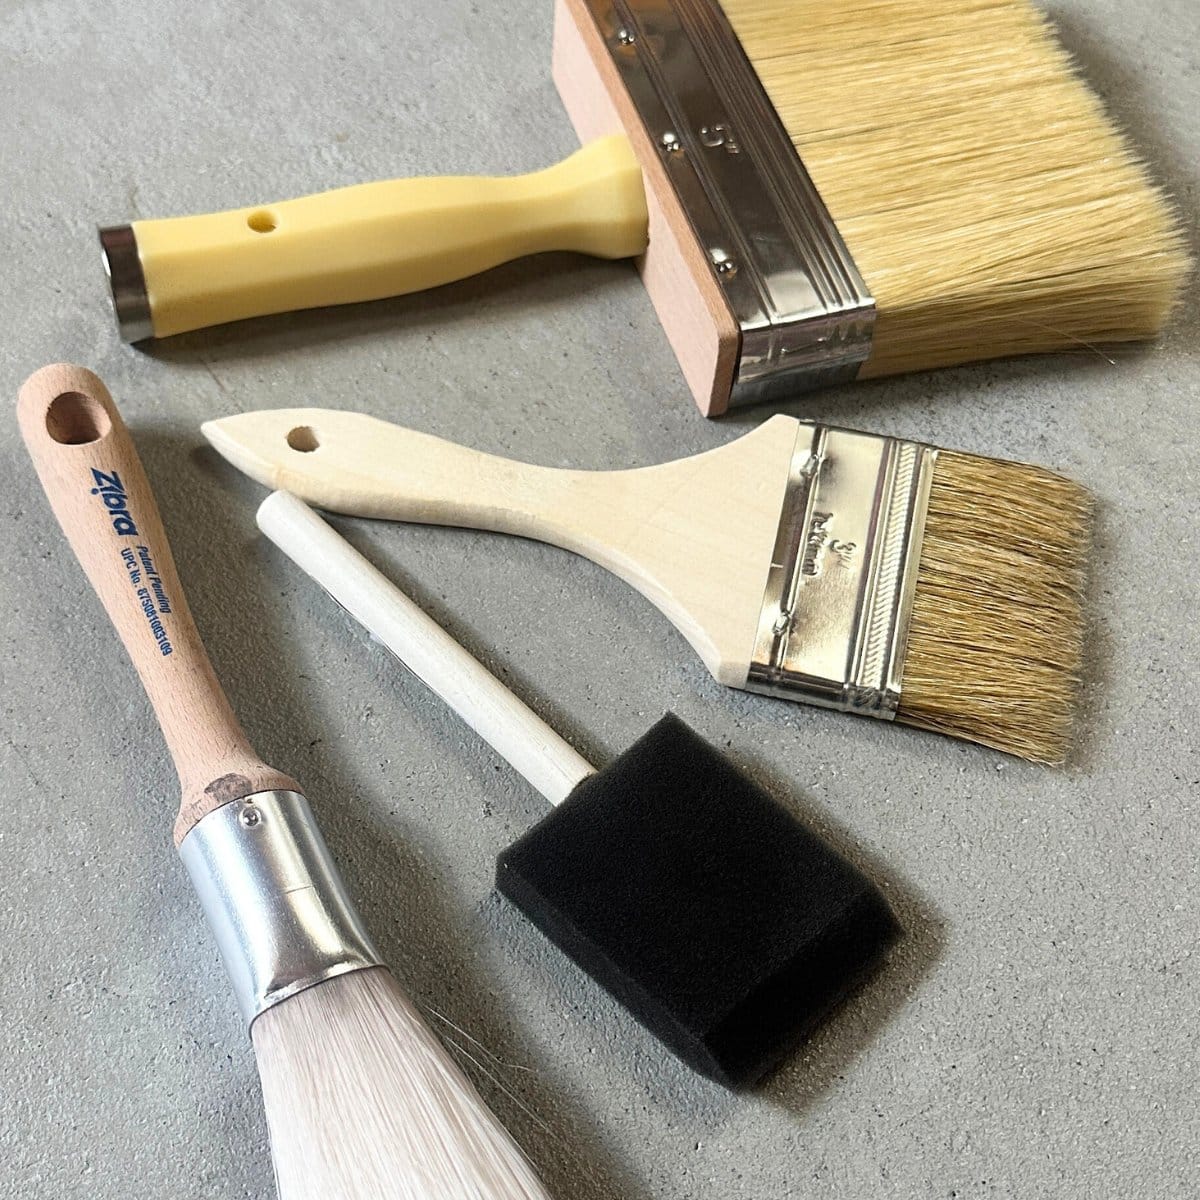 Best Brushes For Staining Wood